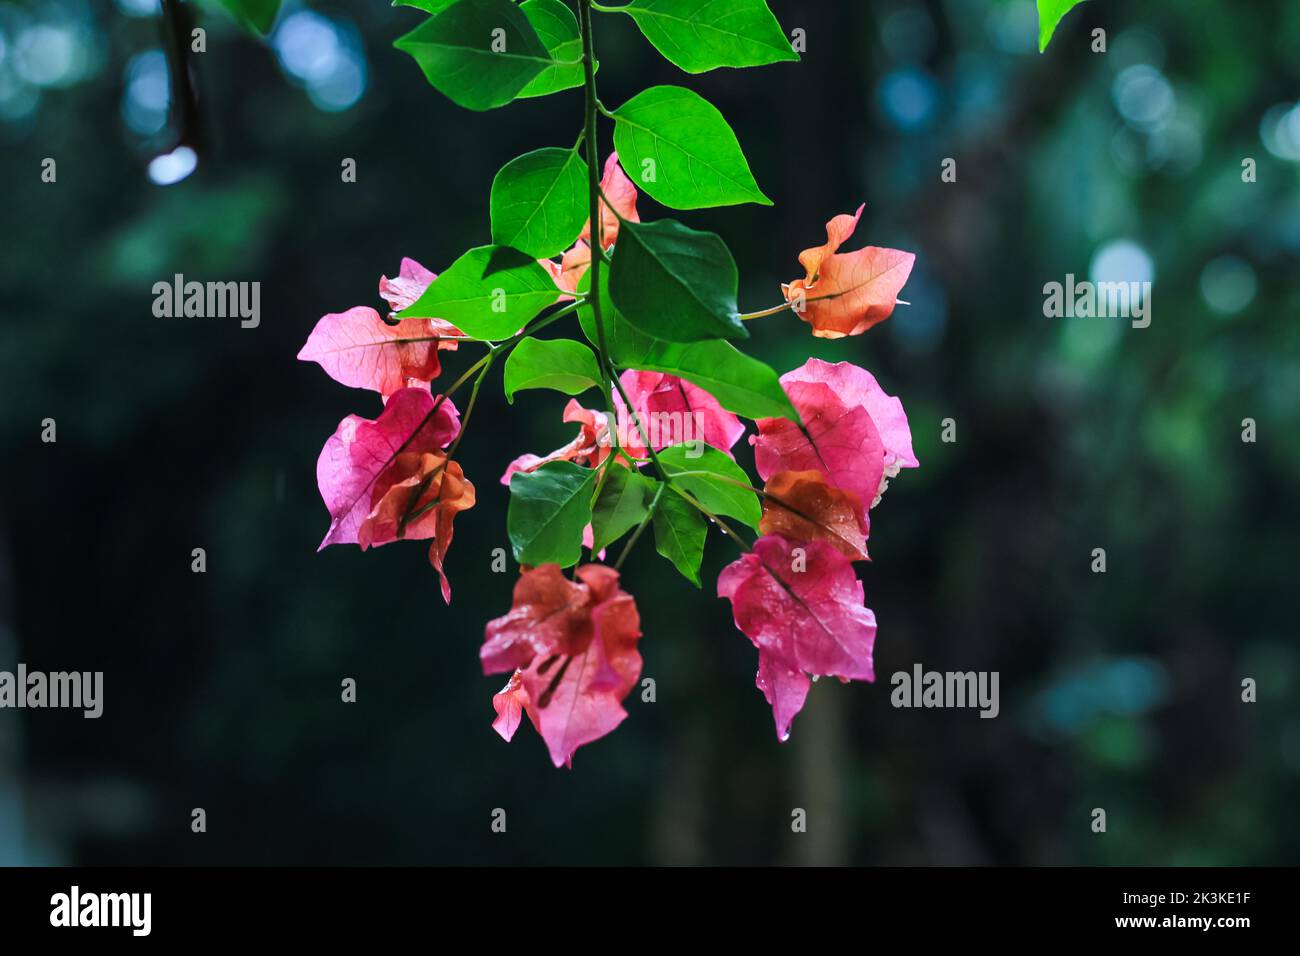 Bougainvillea glabra or paper flower is the most common species of bougainvillea used for bonsai. Blooming pink Bougainvillea flowers close up. Stock Photo